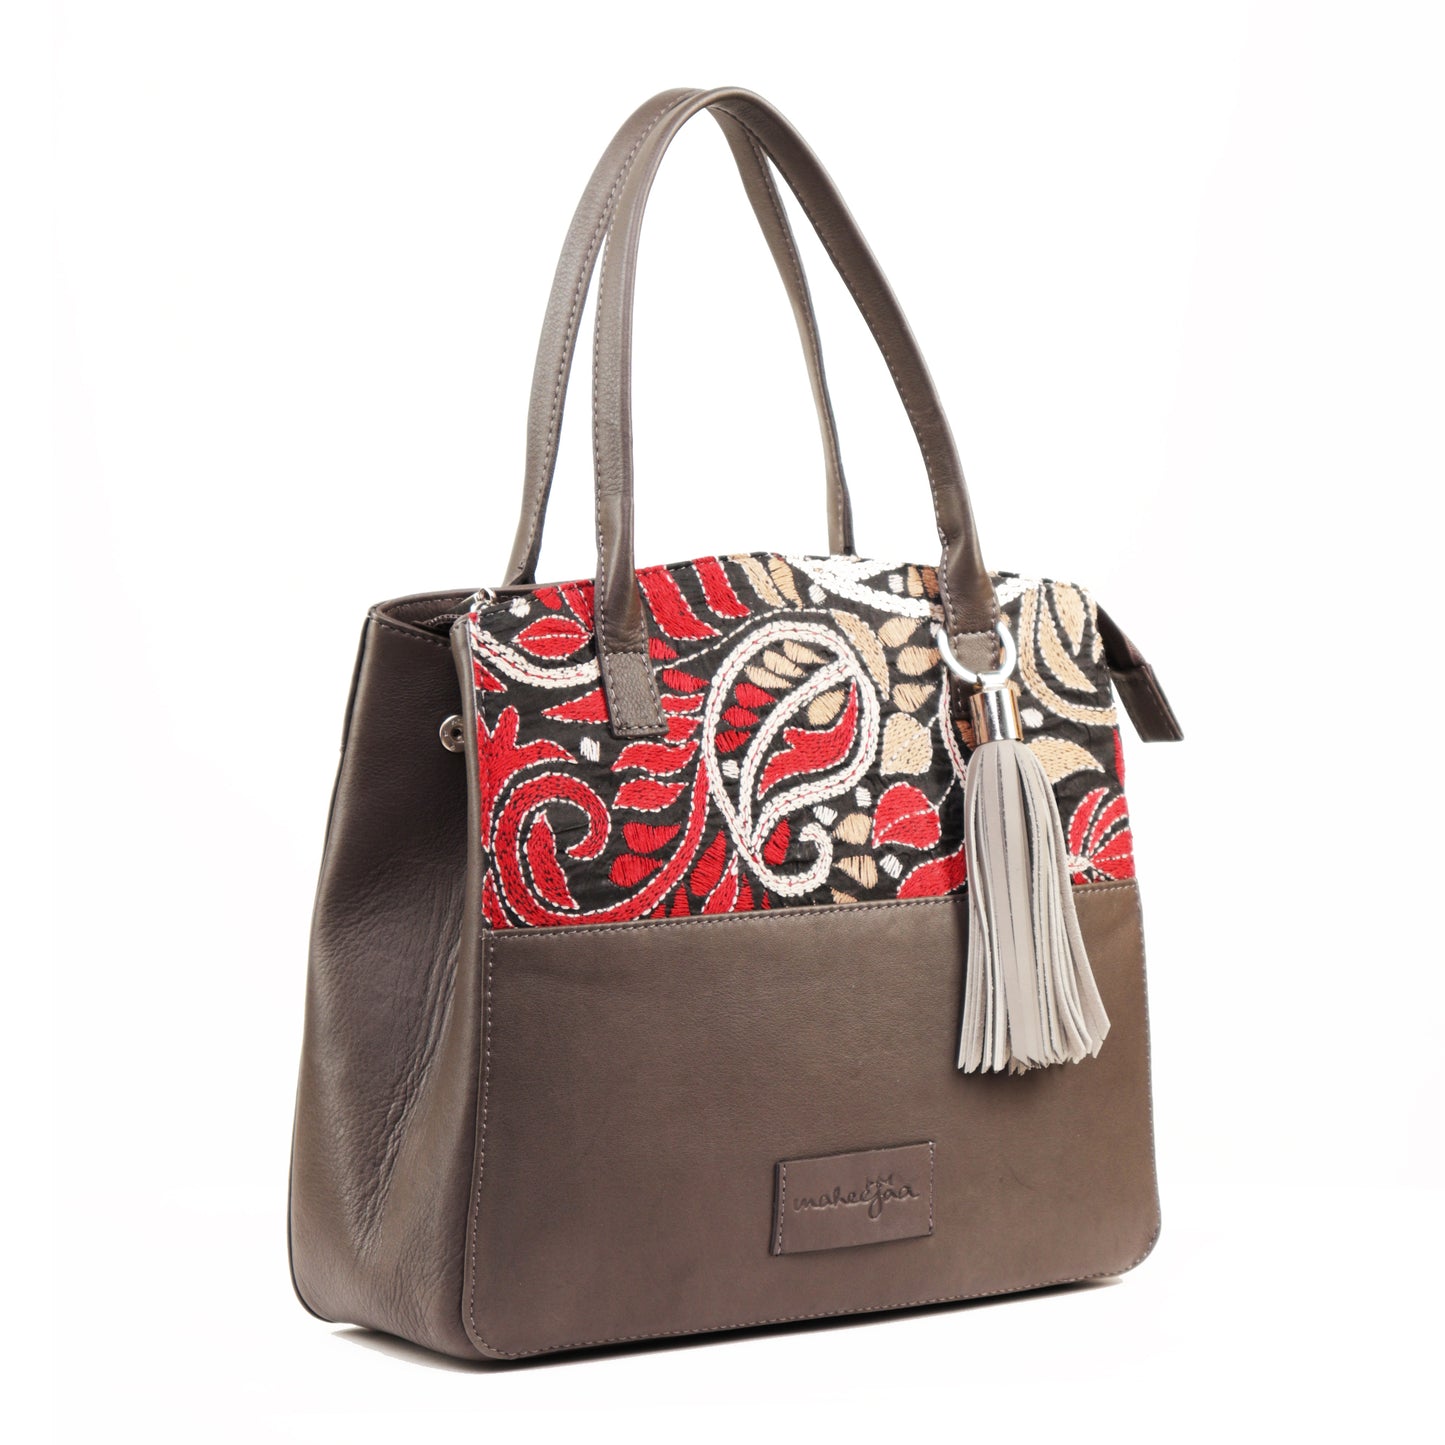 Genuine Leather-Kantha Handcrafted Tote Bag Women (Grey)